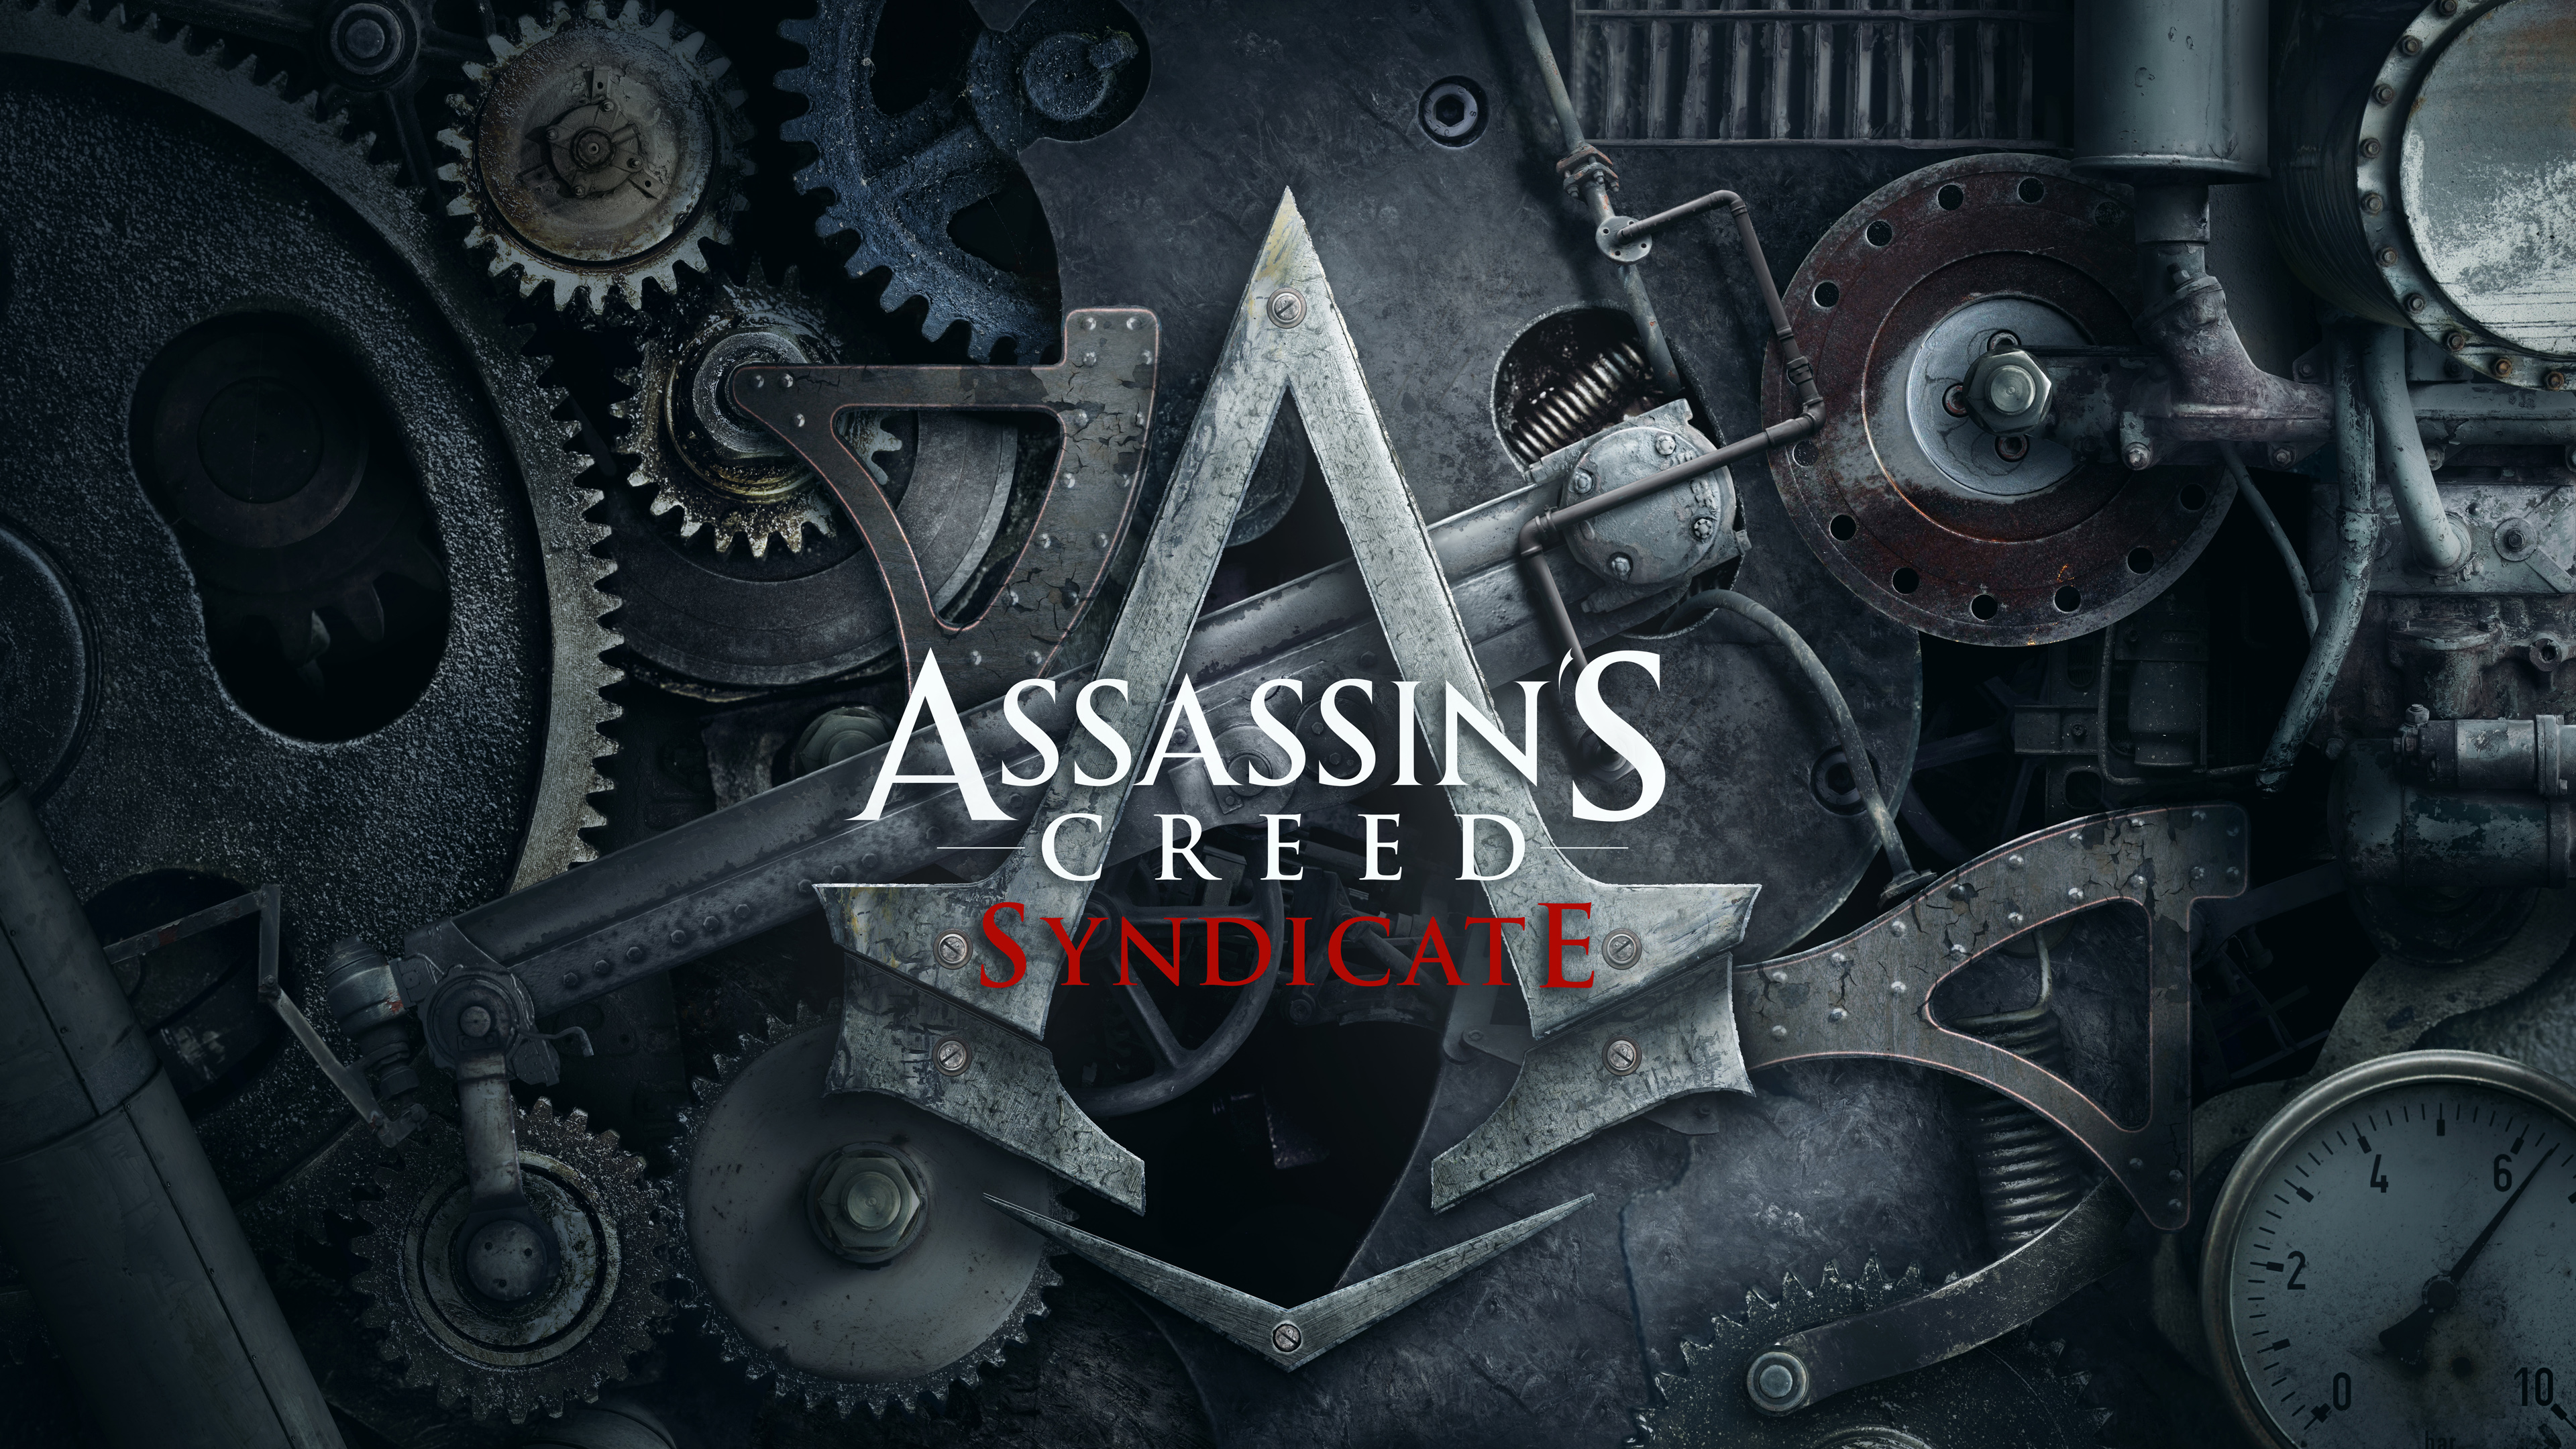 Assassins Creed Syndicate Logo Wallpapers HD Wallpapers 3840x2160